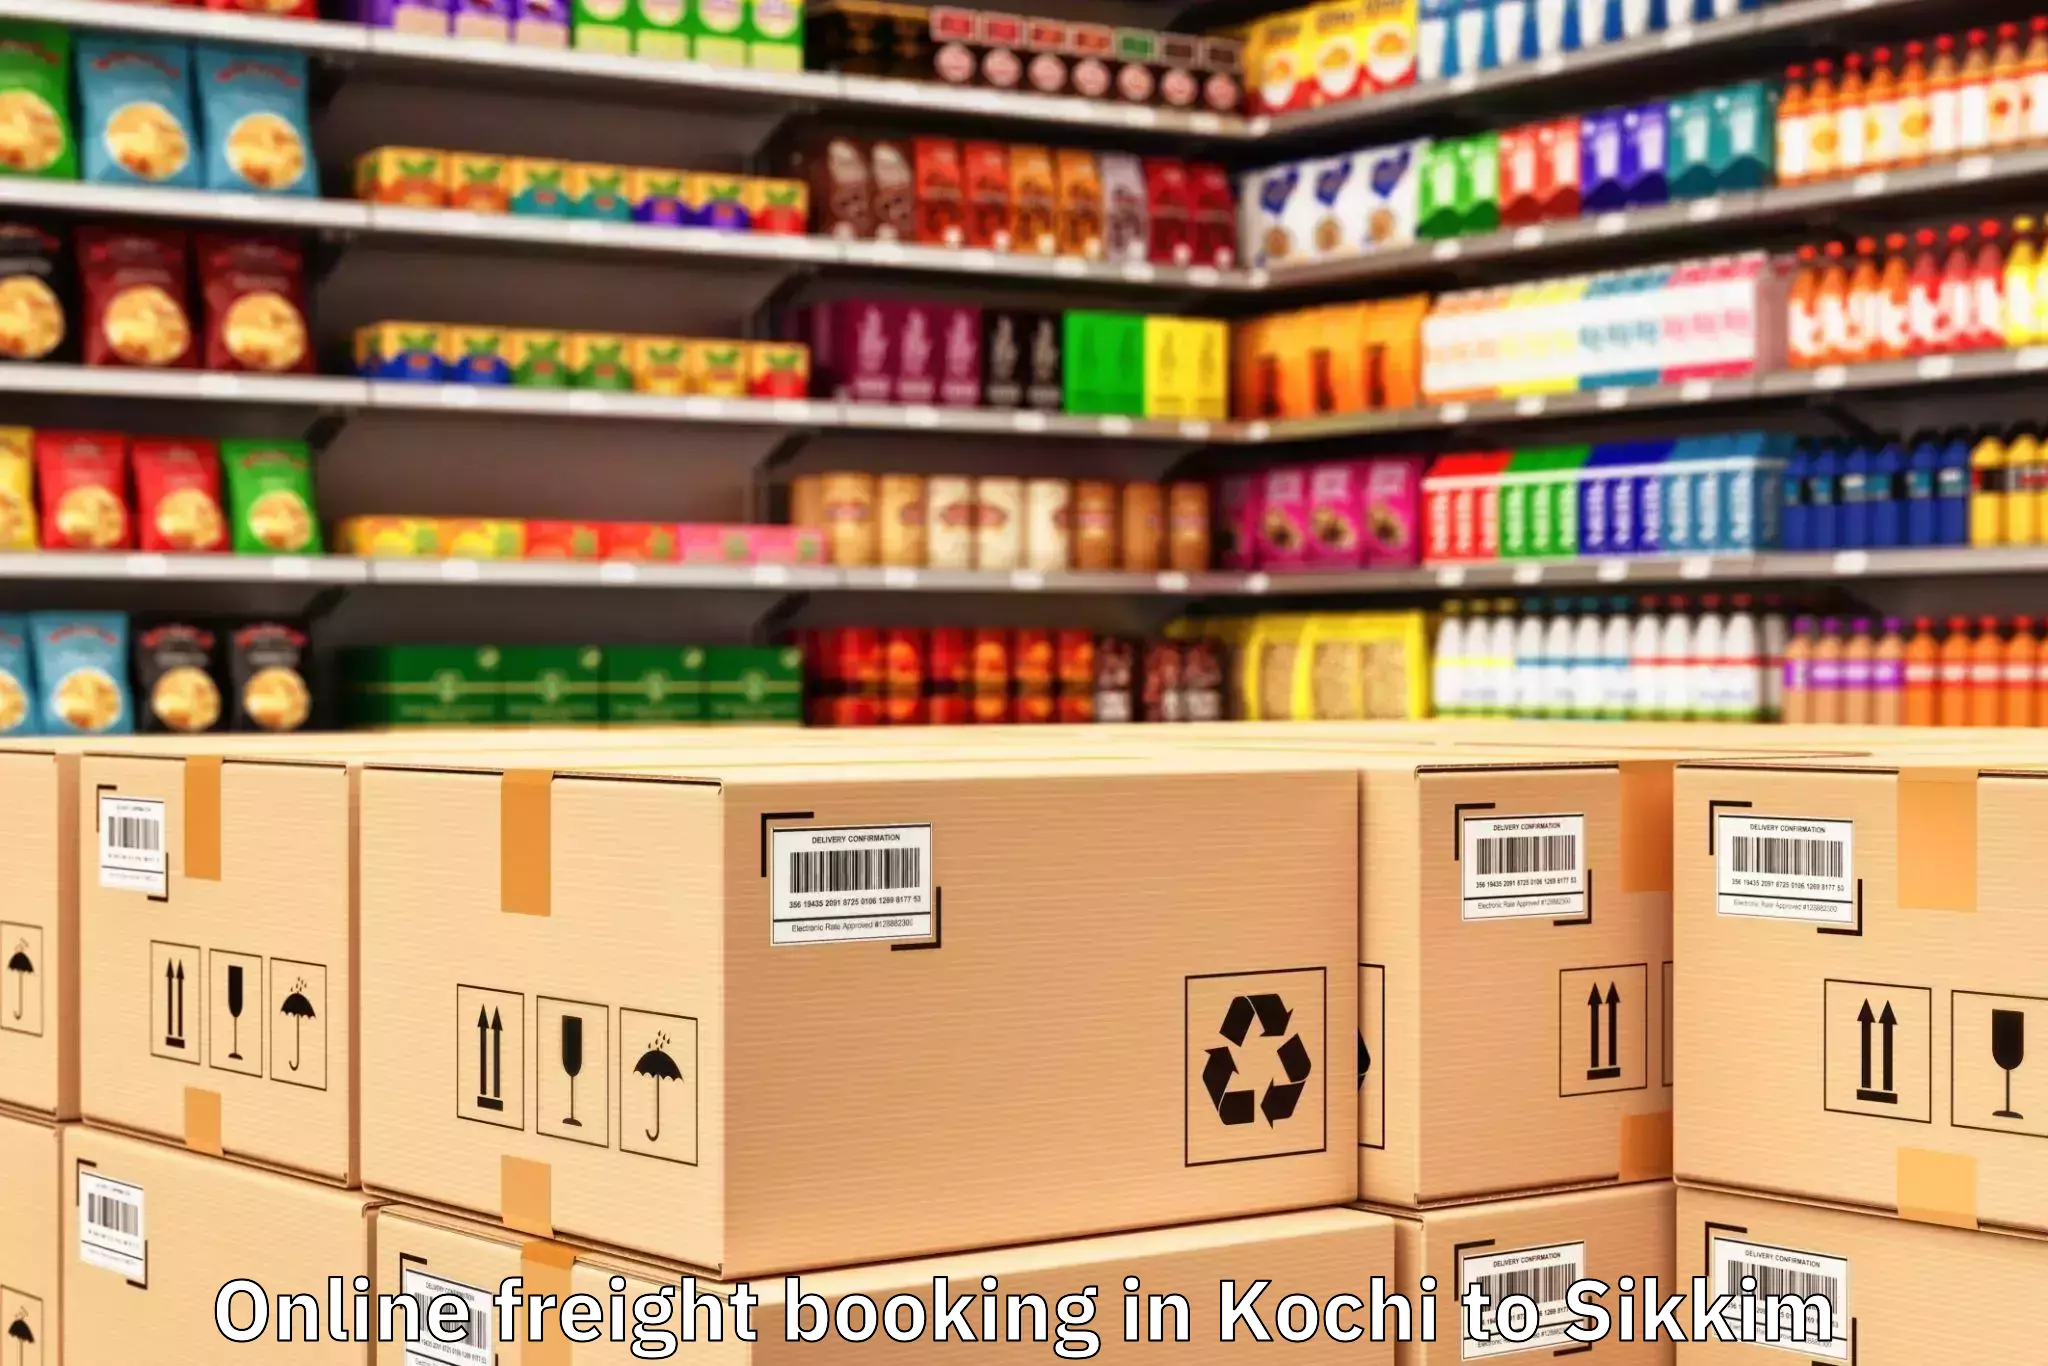 Book Your Kochi to Sikkim Online Freight Booking Today